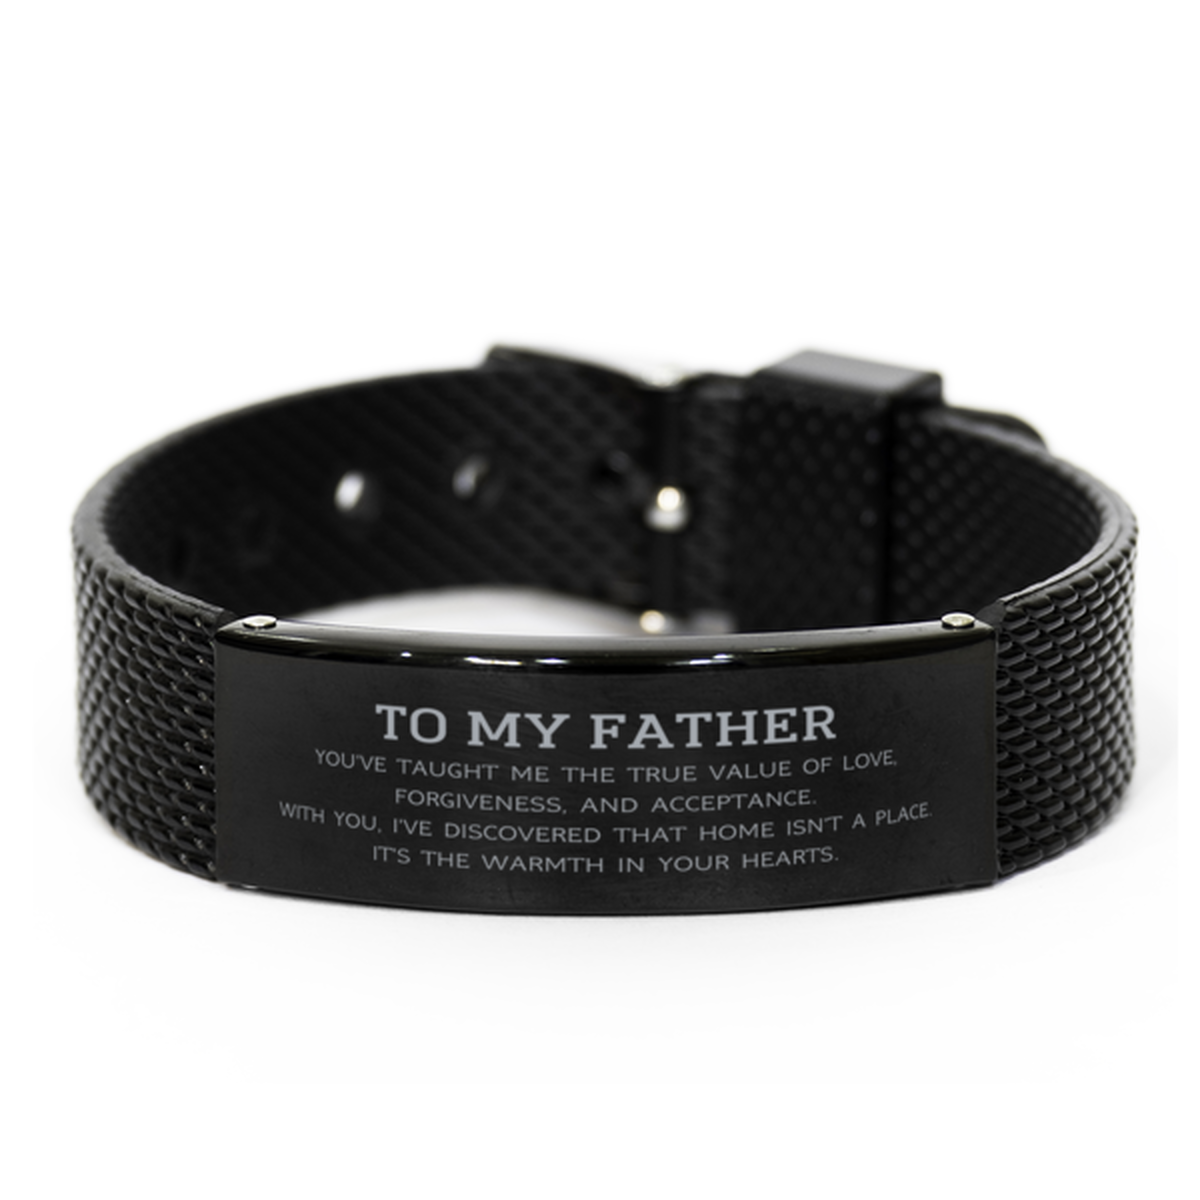 To My Father Gifts, You've taught me the true value of love, Thank You Gifts For Father, Birthday Black Shark Mesh Bracelet For Father